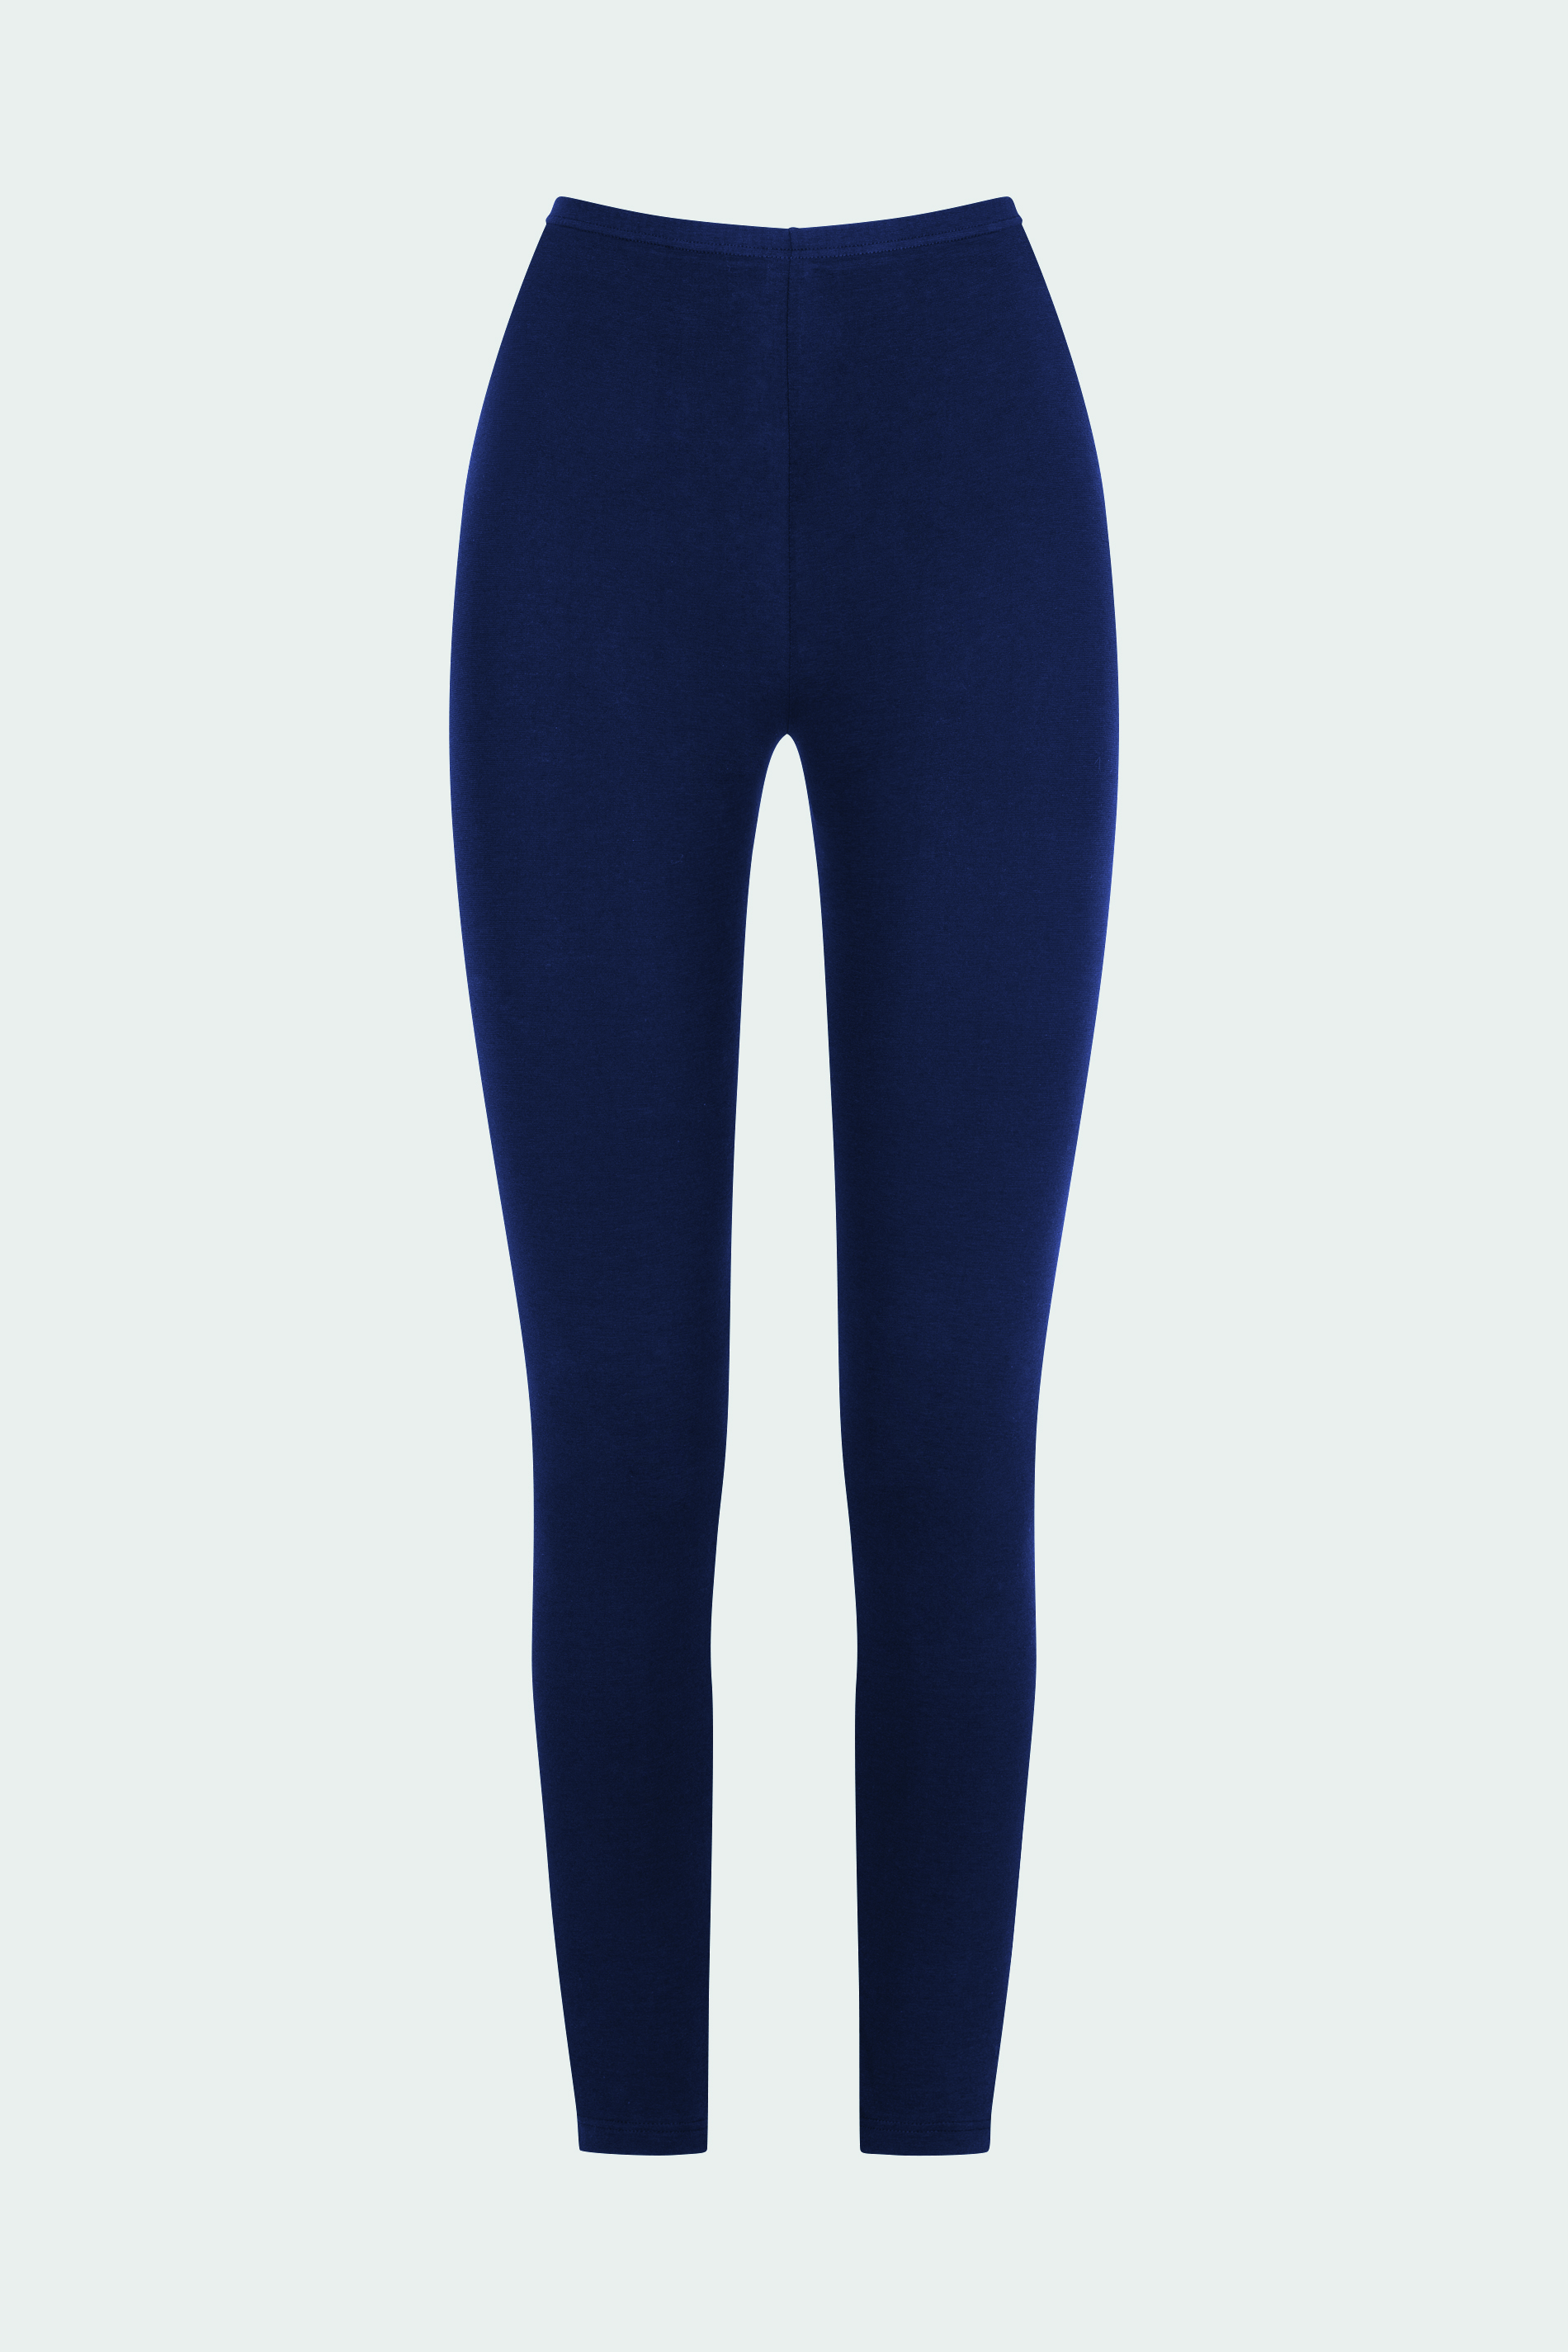 Leggings Night Blue Serie Cotton Pure Uitknippen | mey®